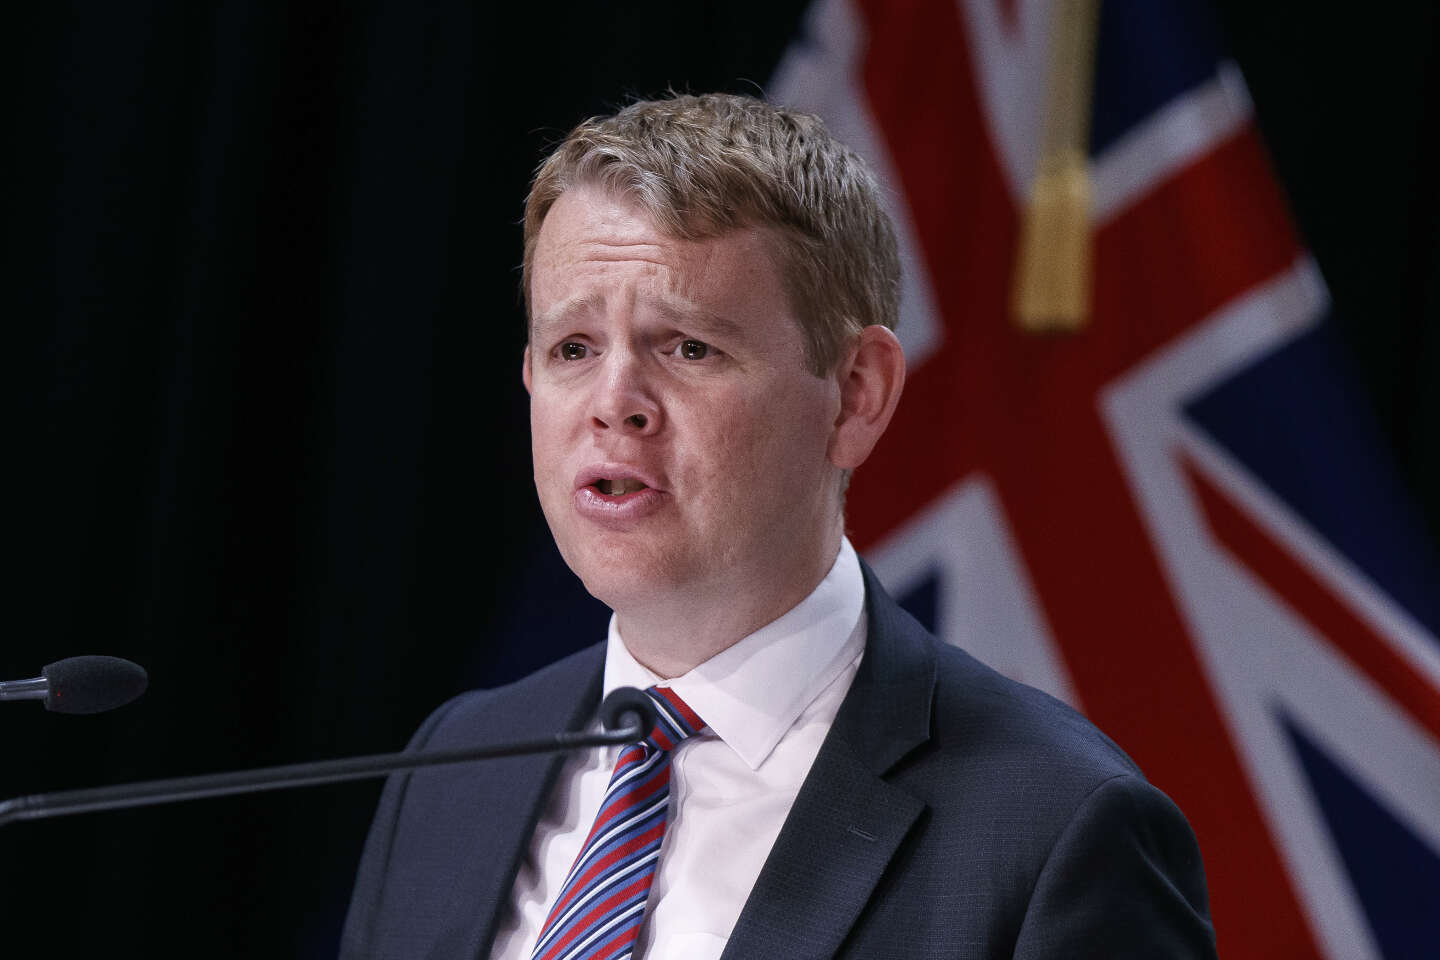 In New Zealand, Chris Hipkins is the next prime minister after the sudden resignation of Jacinda Adern